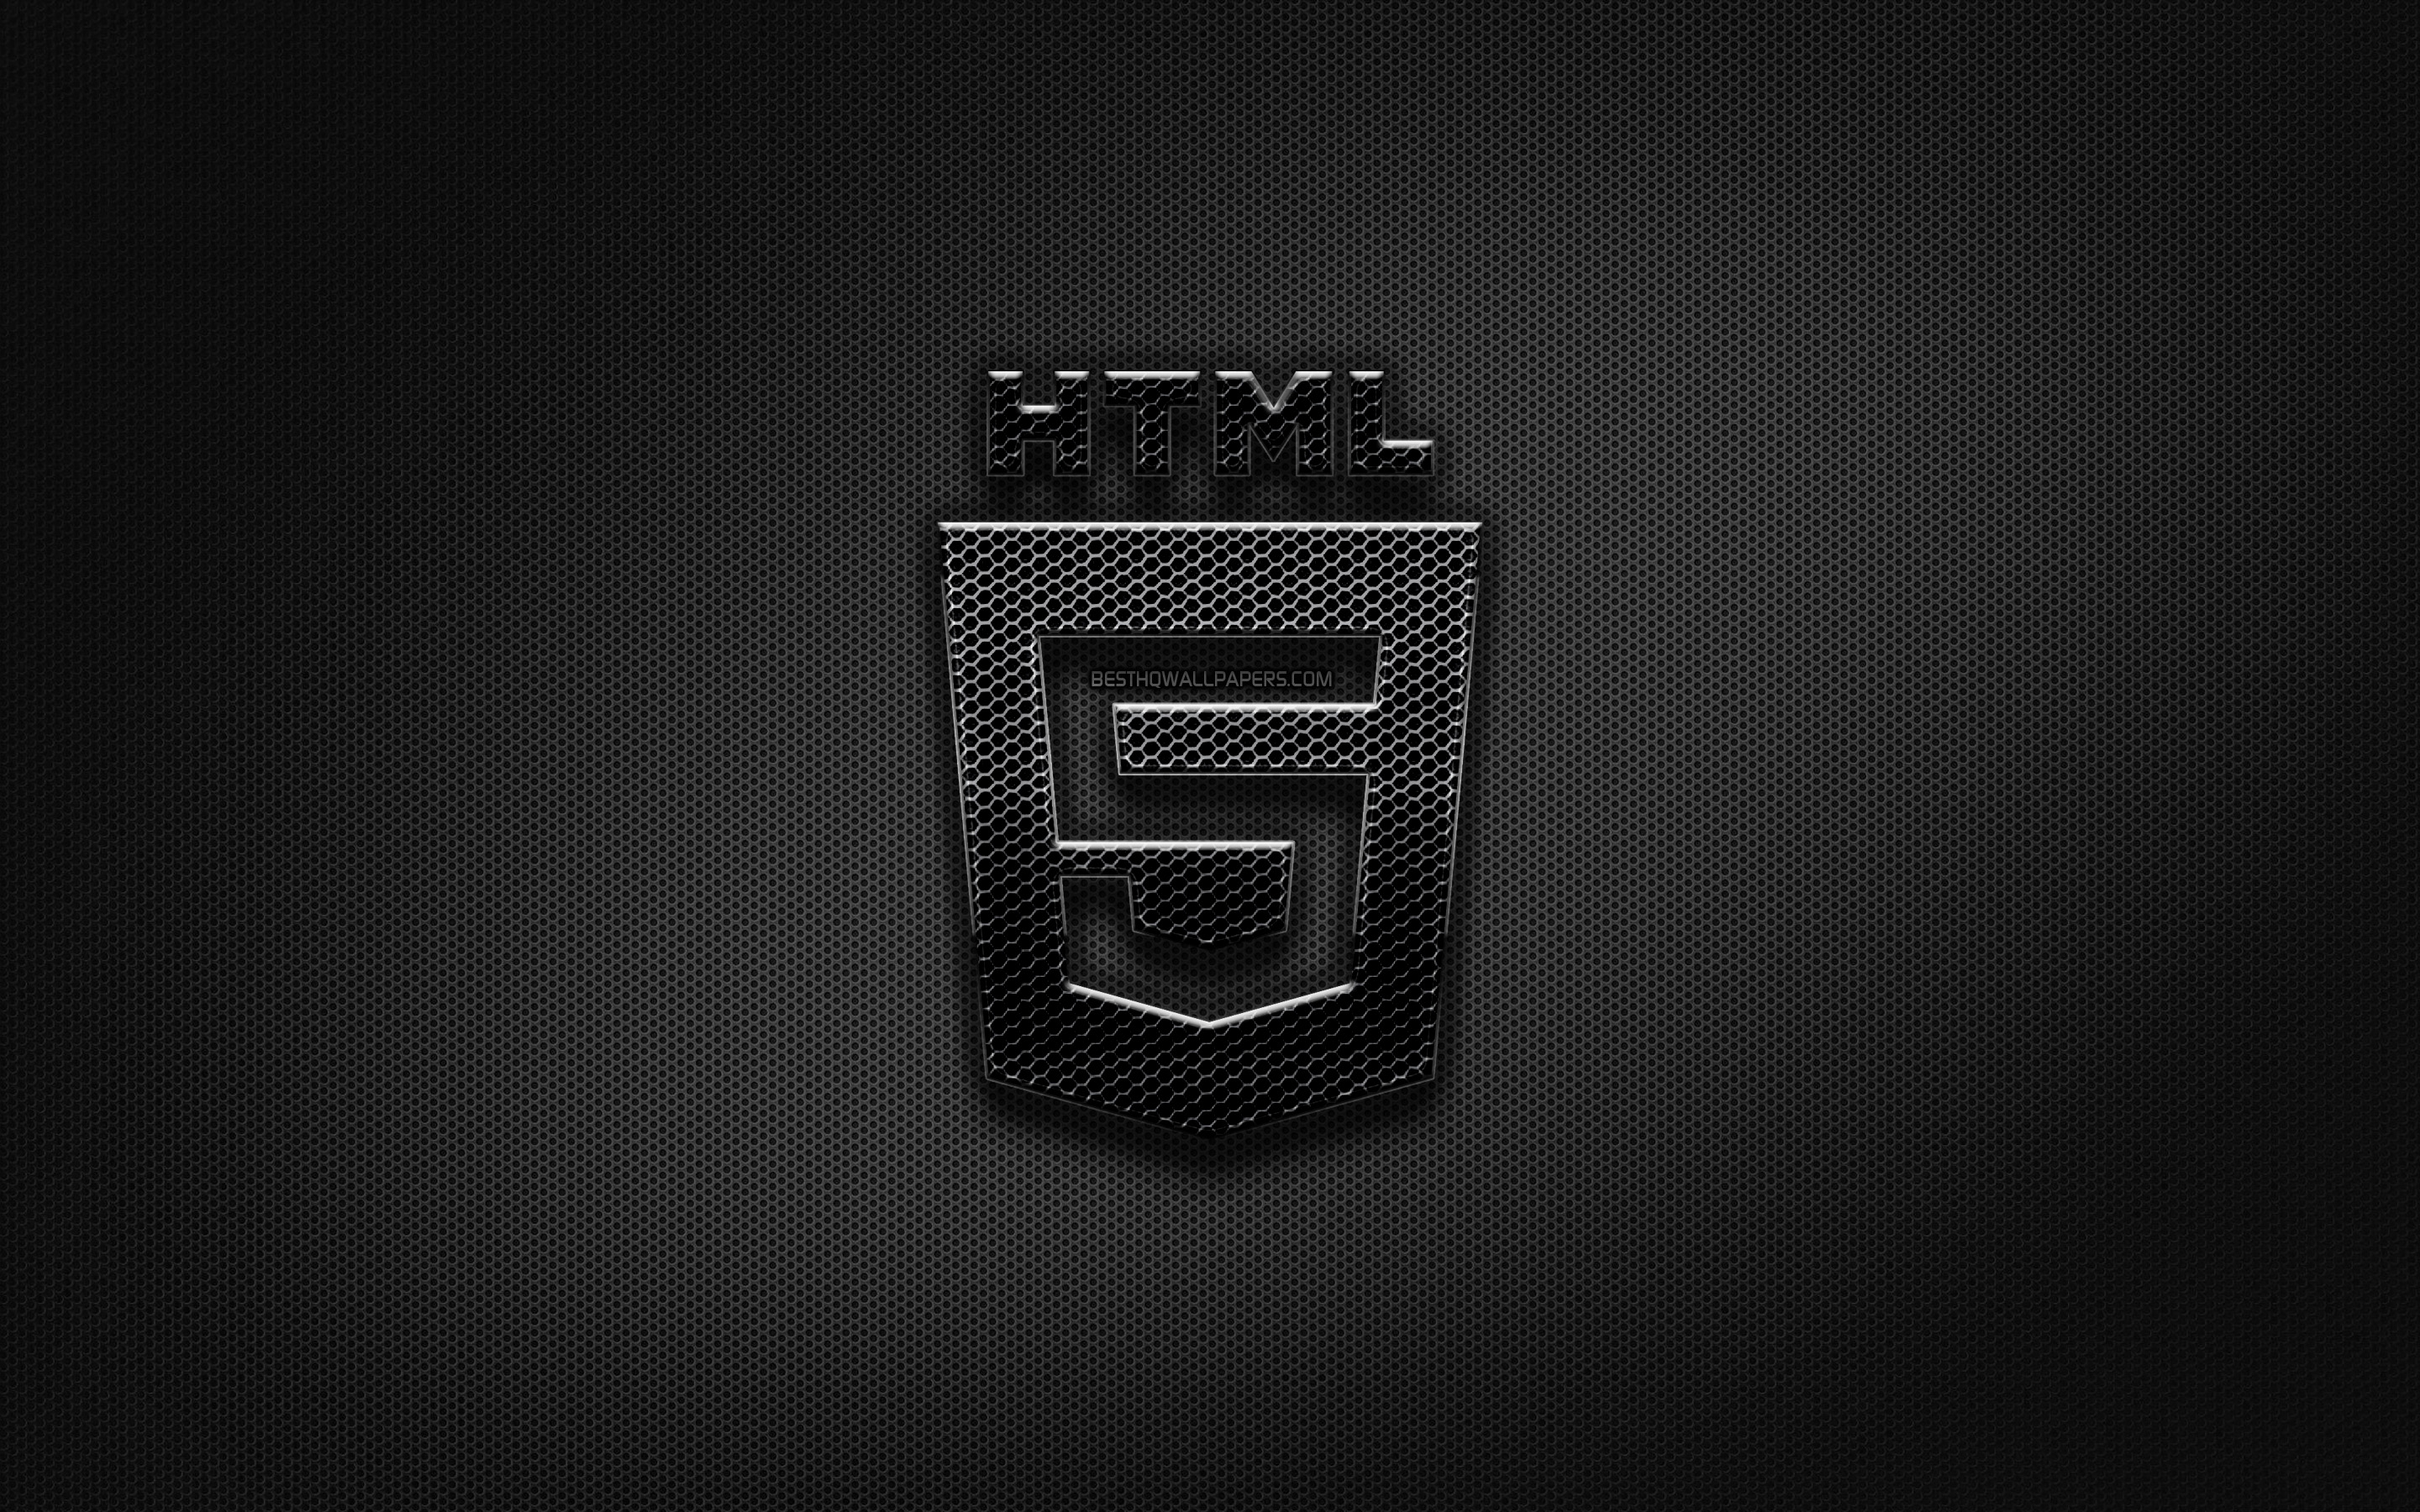 Download wallpaper HTML5 black logo, programming language, grid metal background, HTML artwork, creative, programming language signs, HTML5 logo for desktop with resolution 2880x1800. High Quality HD picture wallpaper